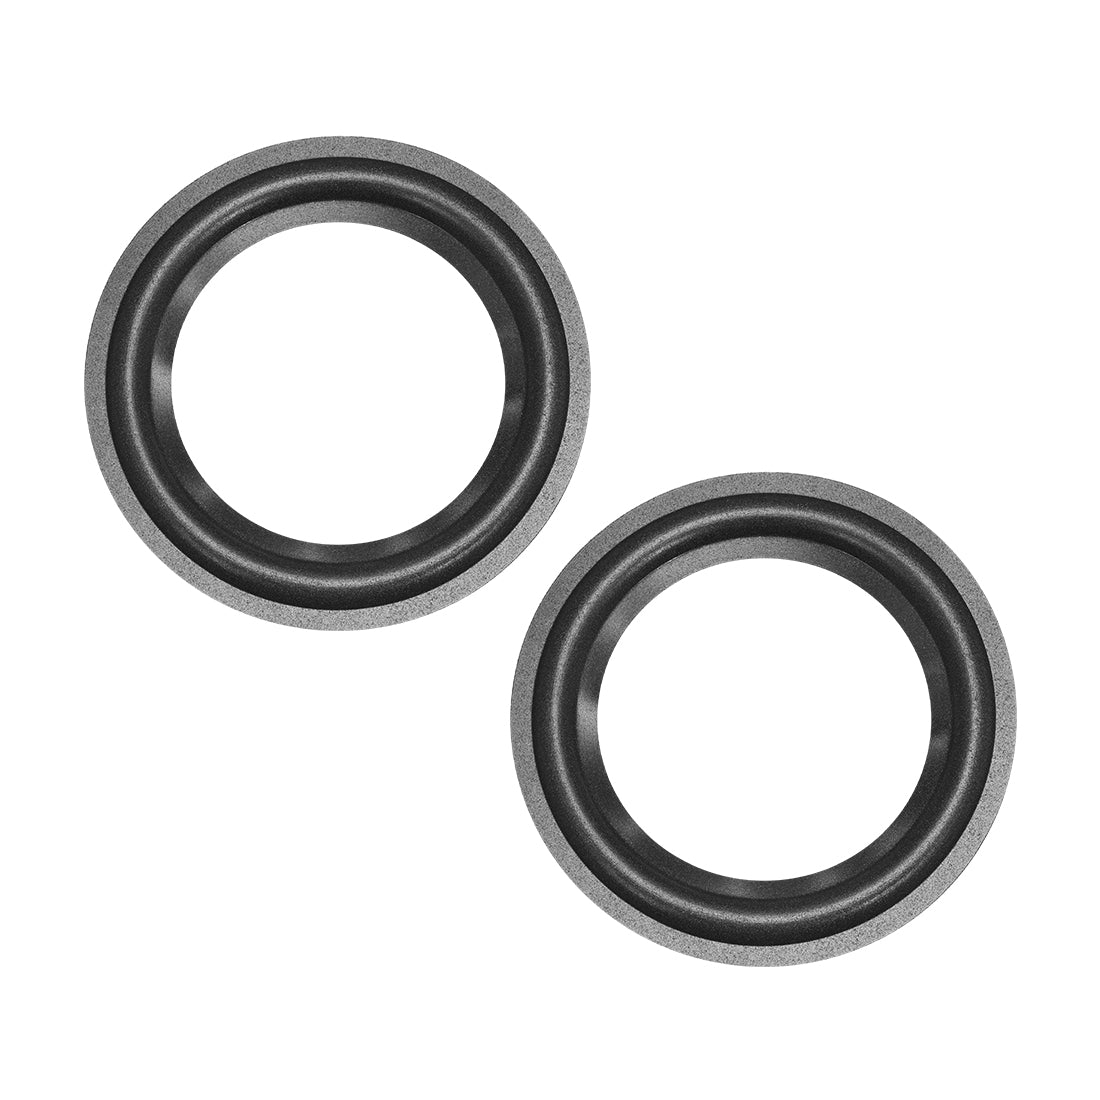 uxcell Uxcell 4.5" 4.5 inches Speaker Foam Edge Surround Rings Replacement Parts for Speaker Repair or DIY 2pcs